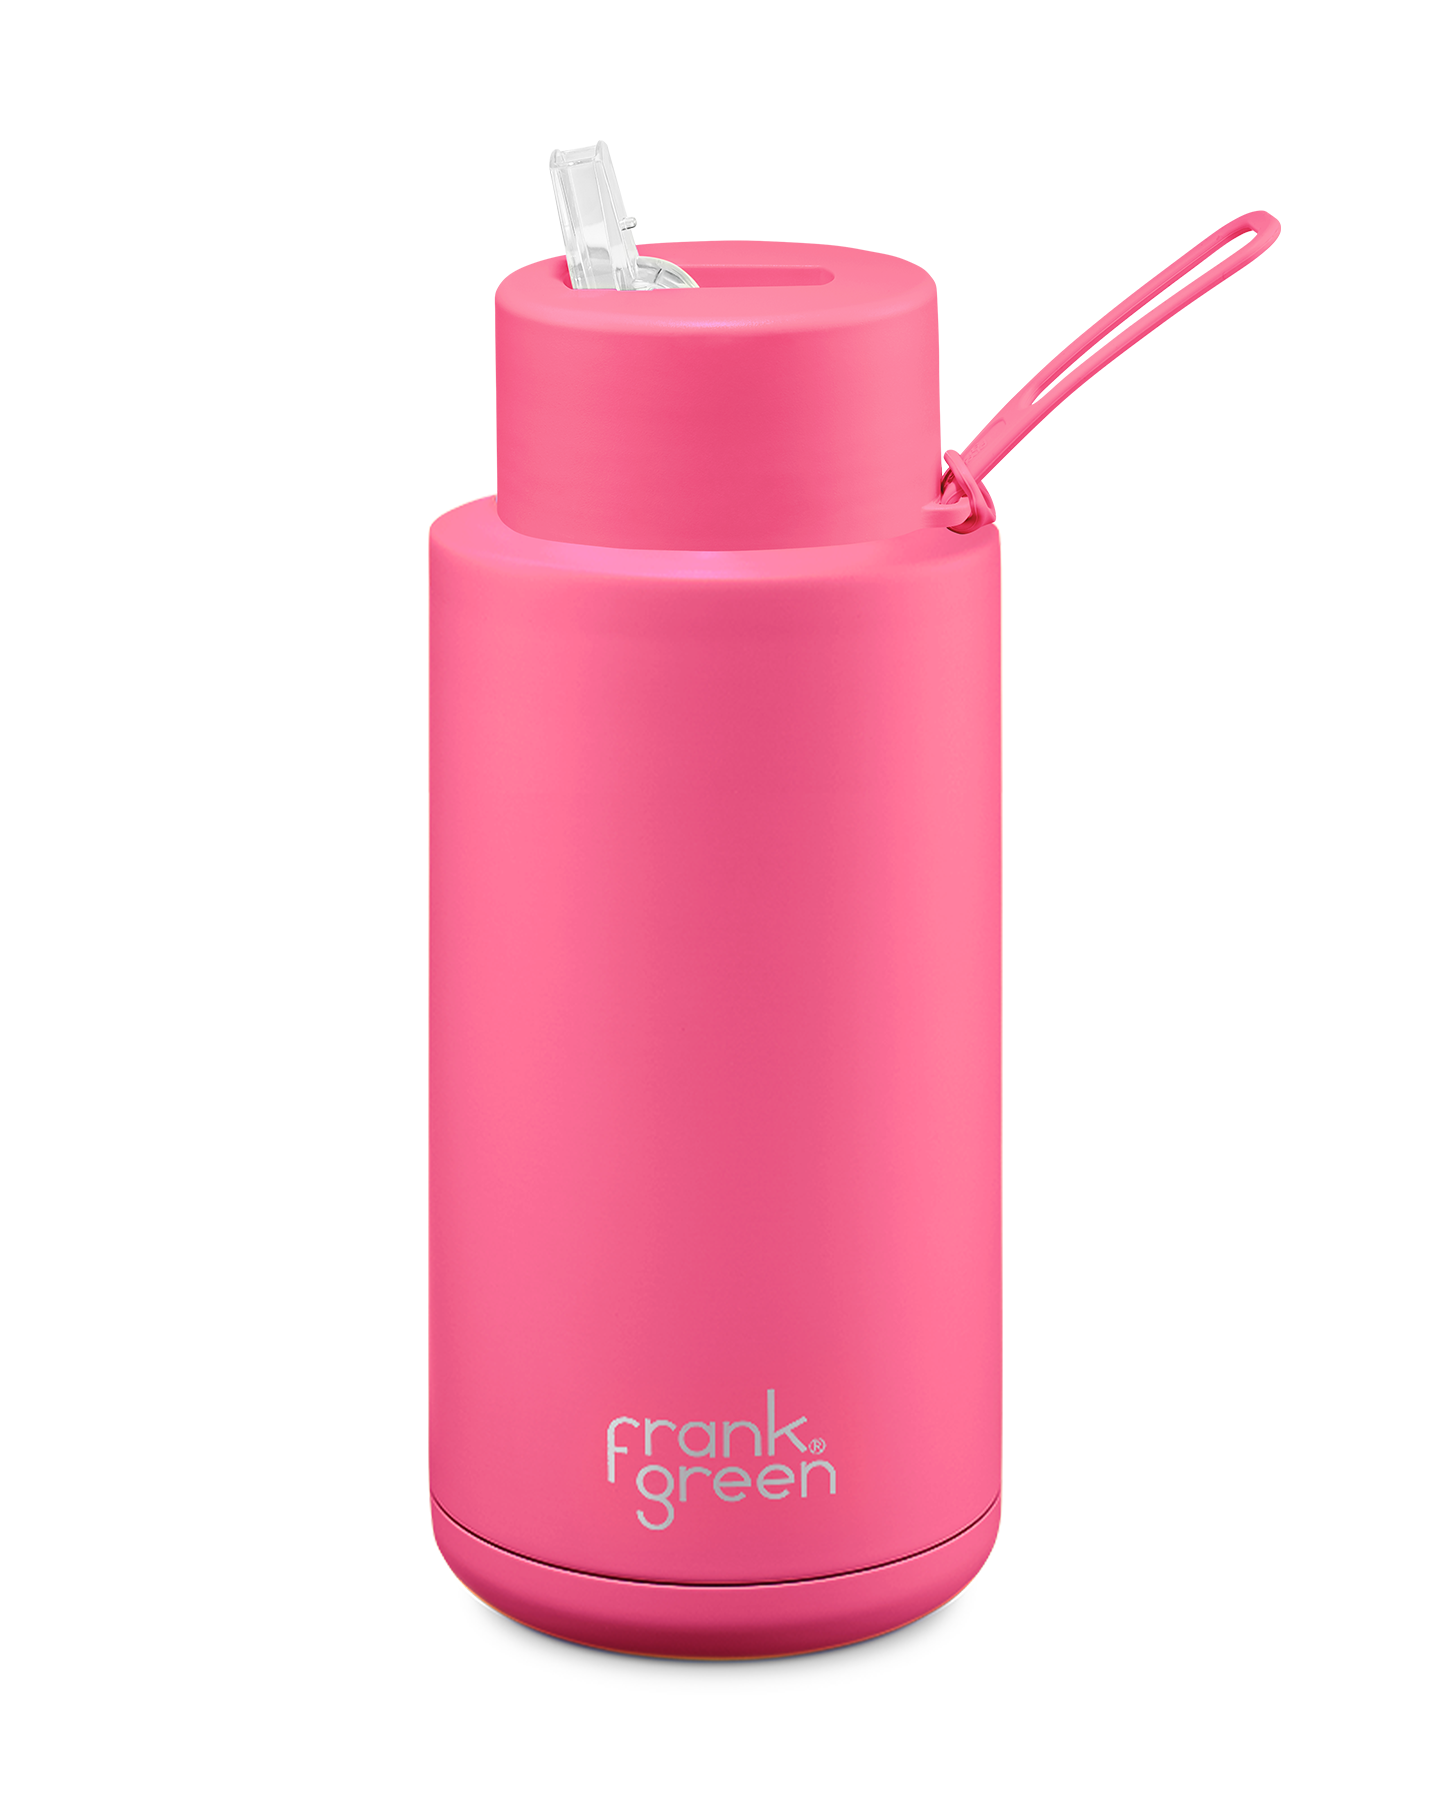 FRANK GREEN CERAMIC REUSABLE BOTTLE 34oz/1 LITRE WITH STRAW LID - NEON PINK